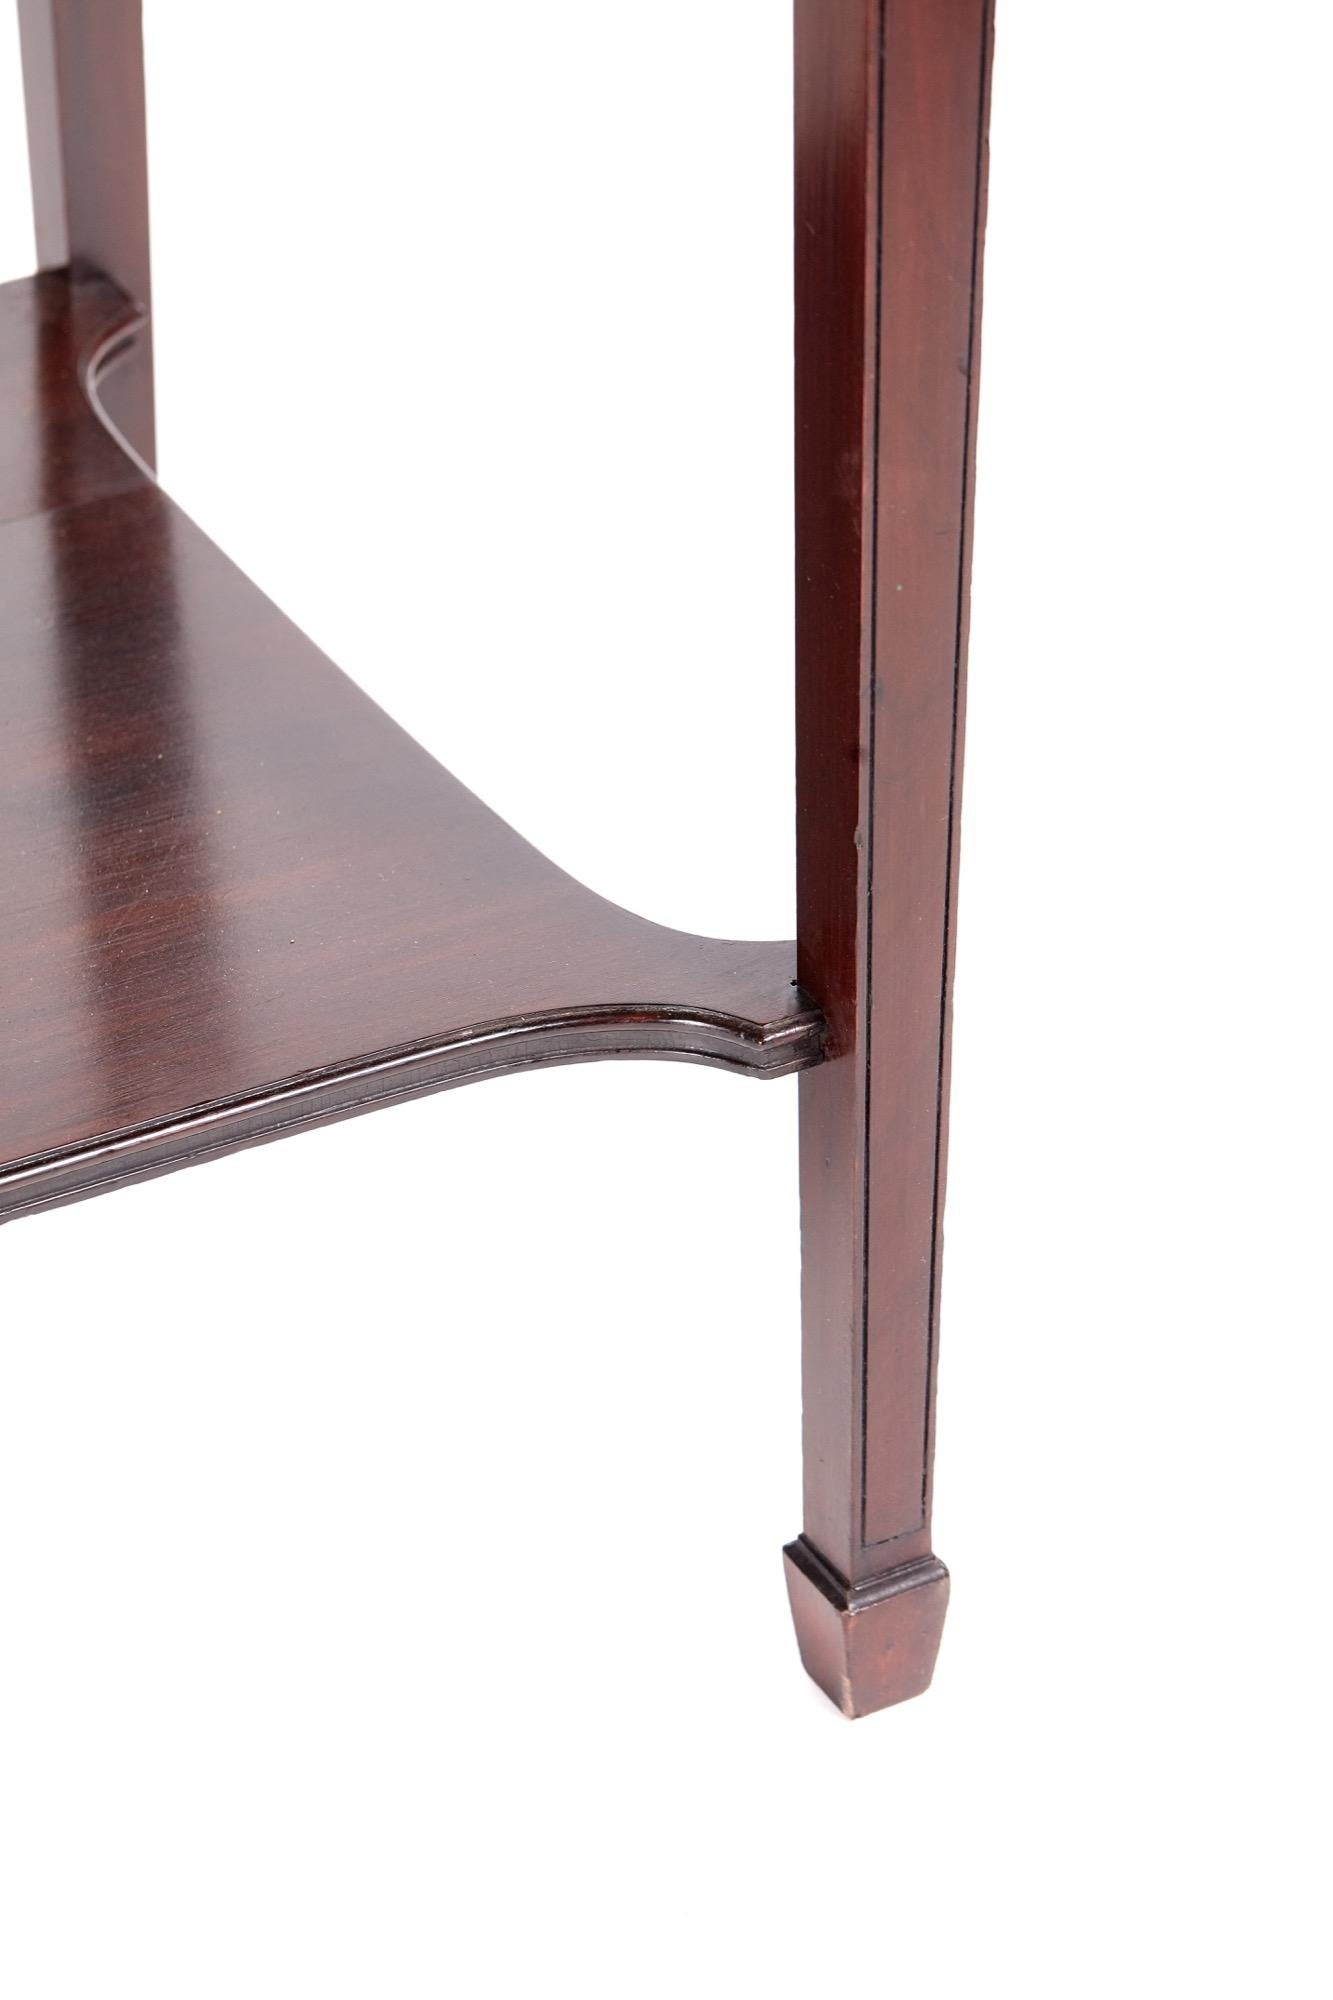 Quality Antique Edwardian Mahogany Freestanding Side Table For Sale 2